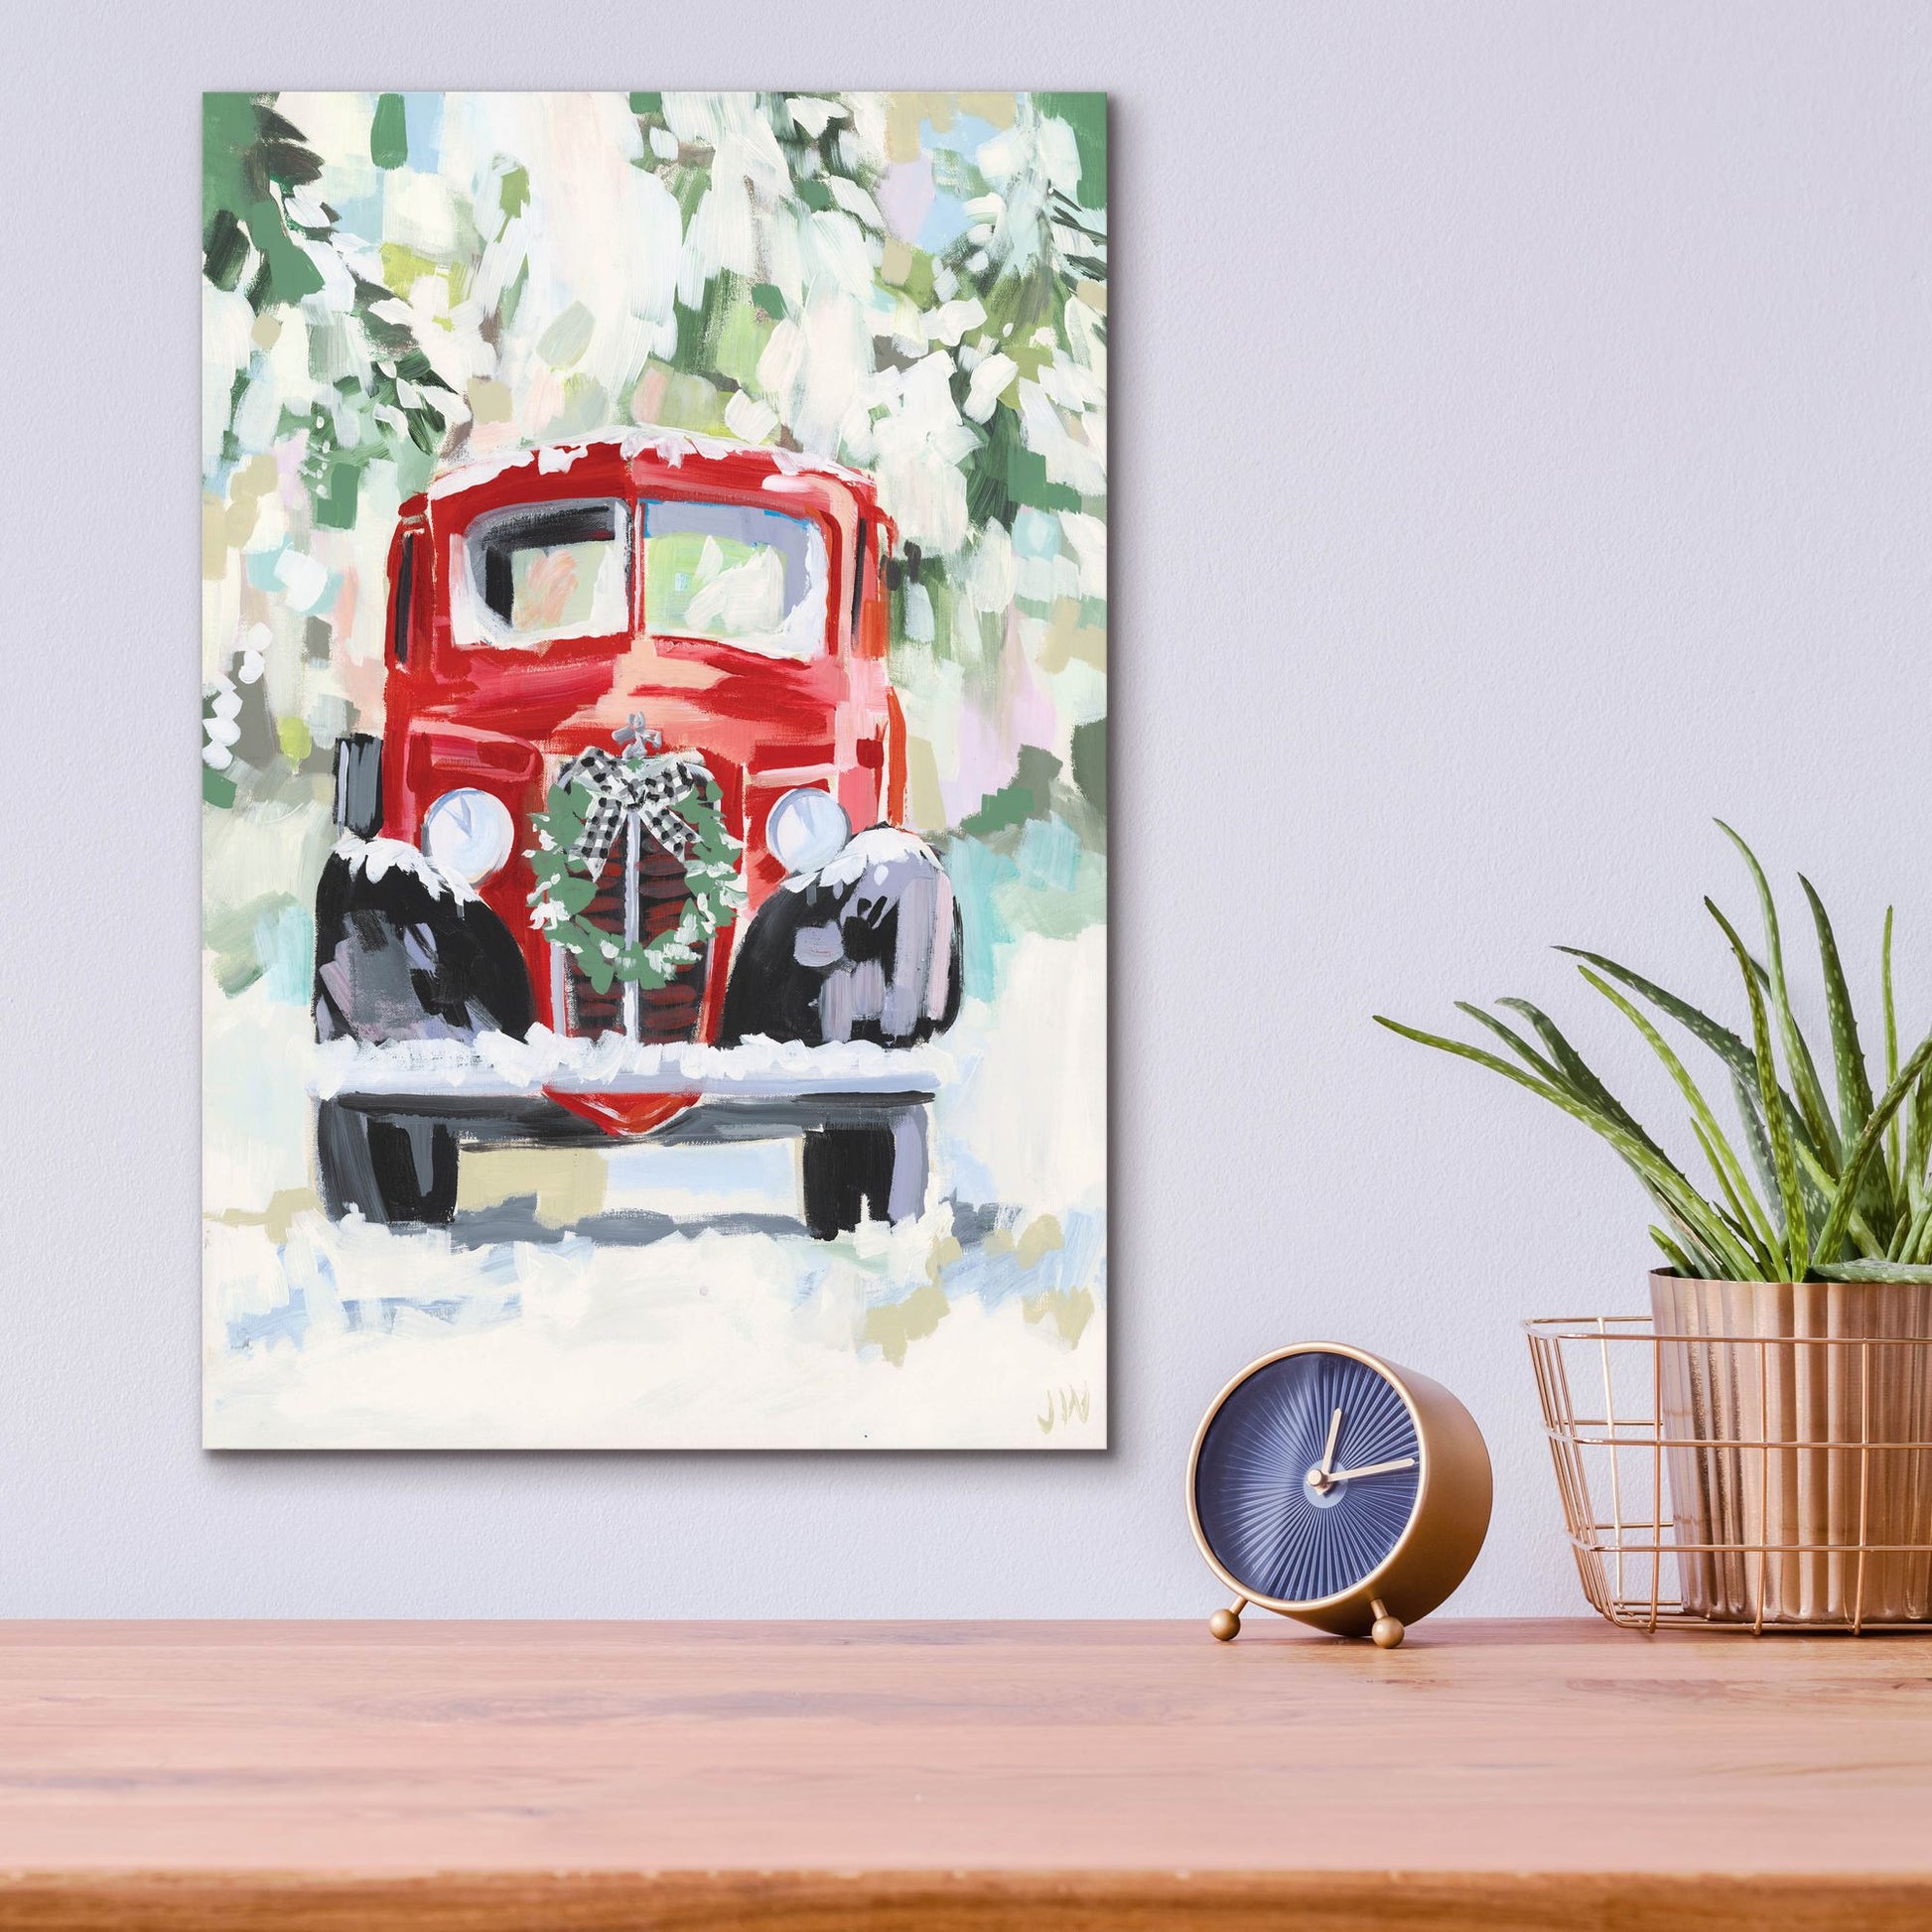 Epic Art 'Red Vintage Truck with Wreath' by Jenny Westenhofer, Acrylic Glass Wall Art,12x16